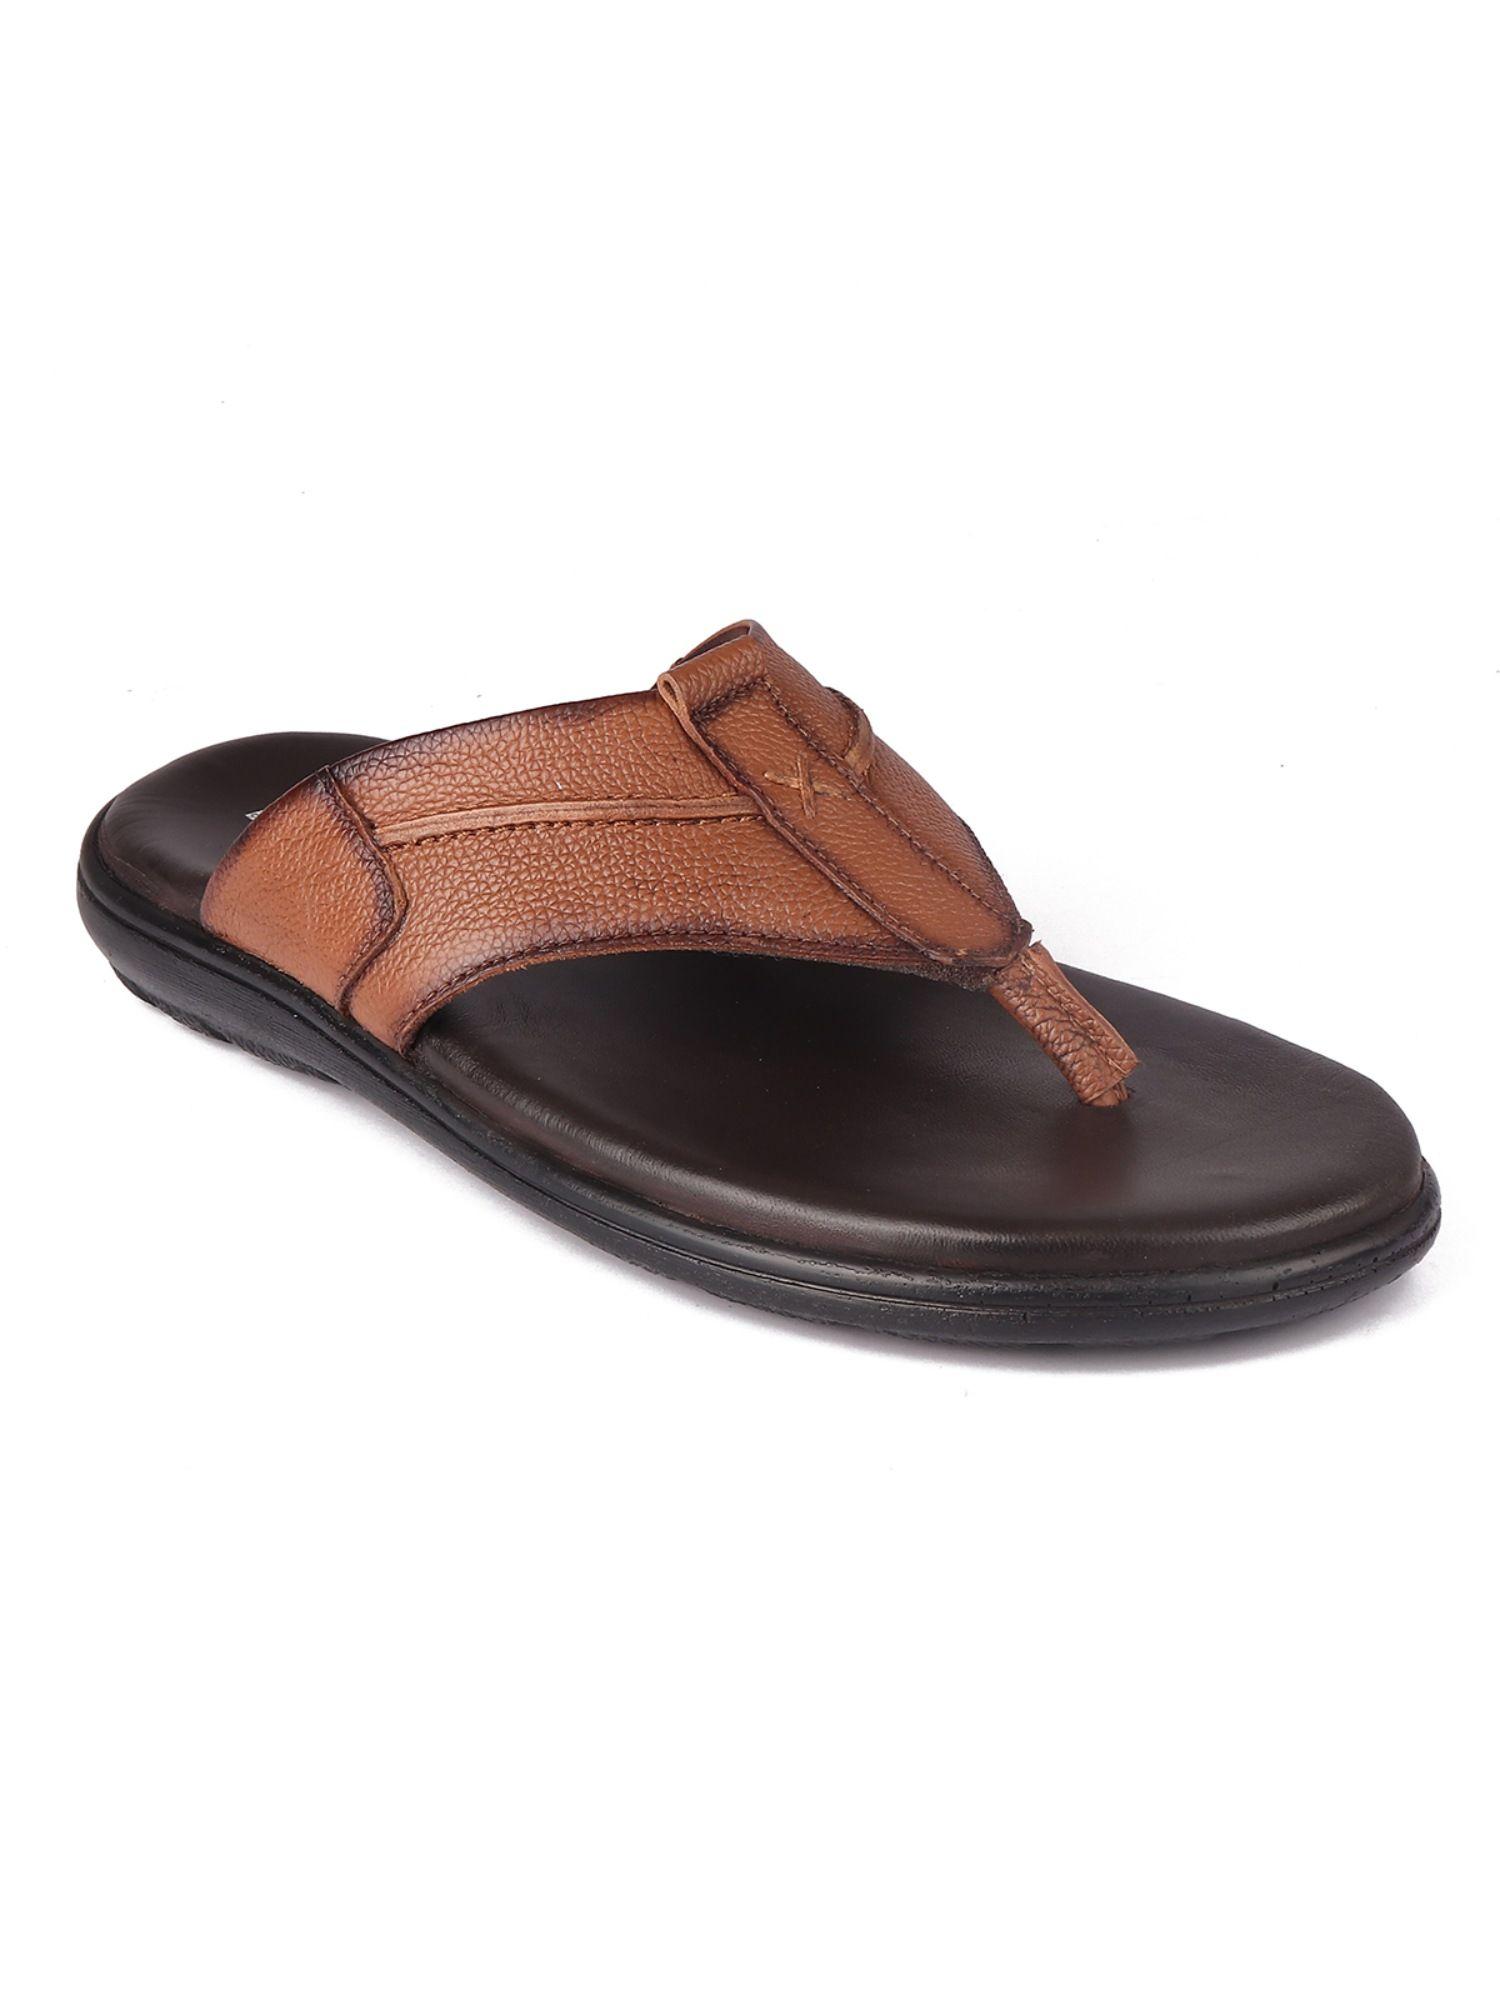 tan leather casual solid thong slipper for men